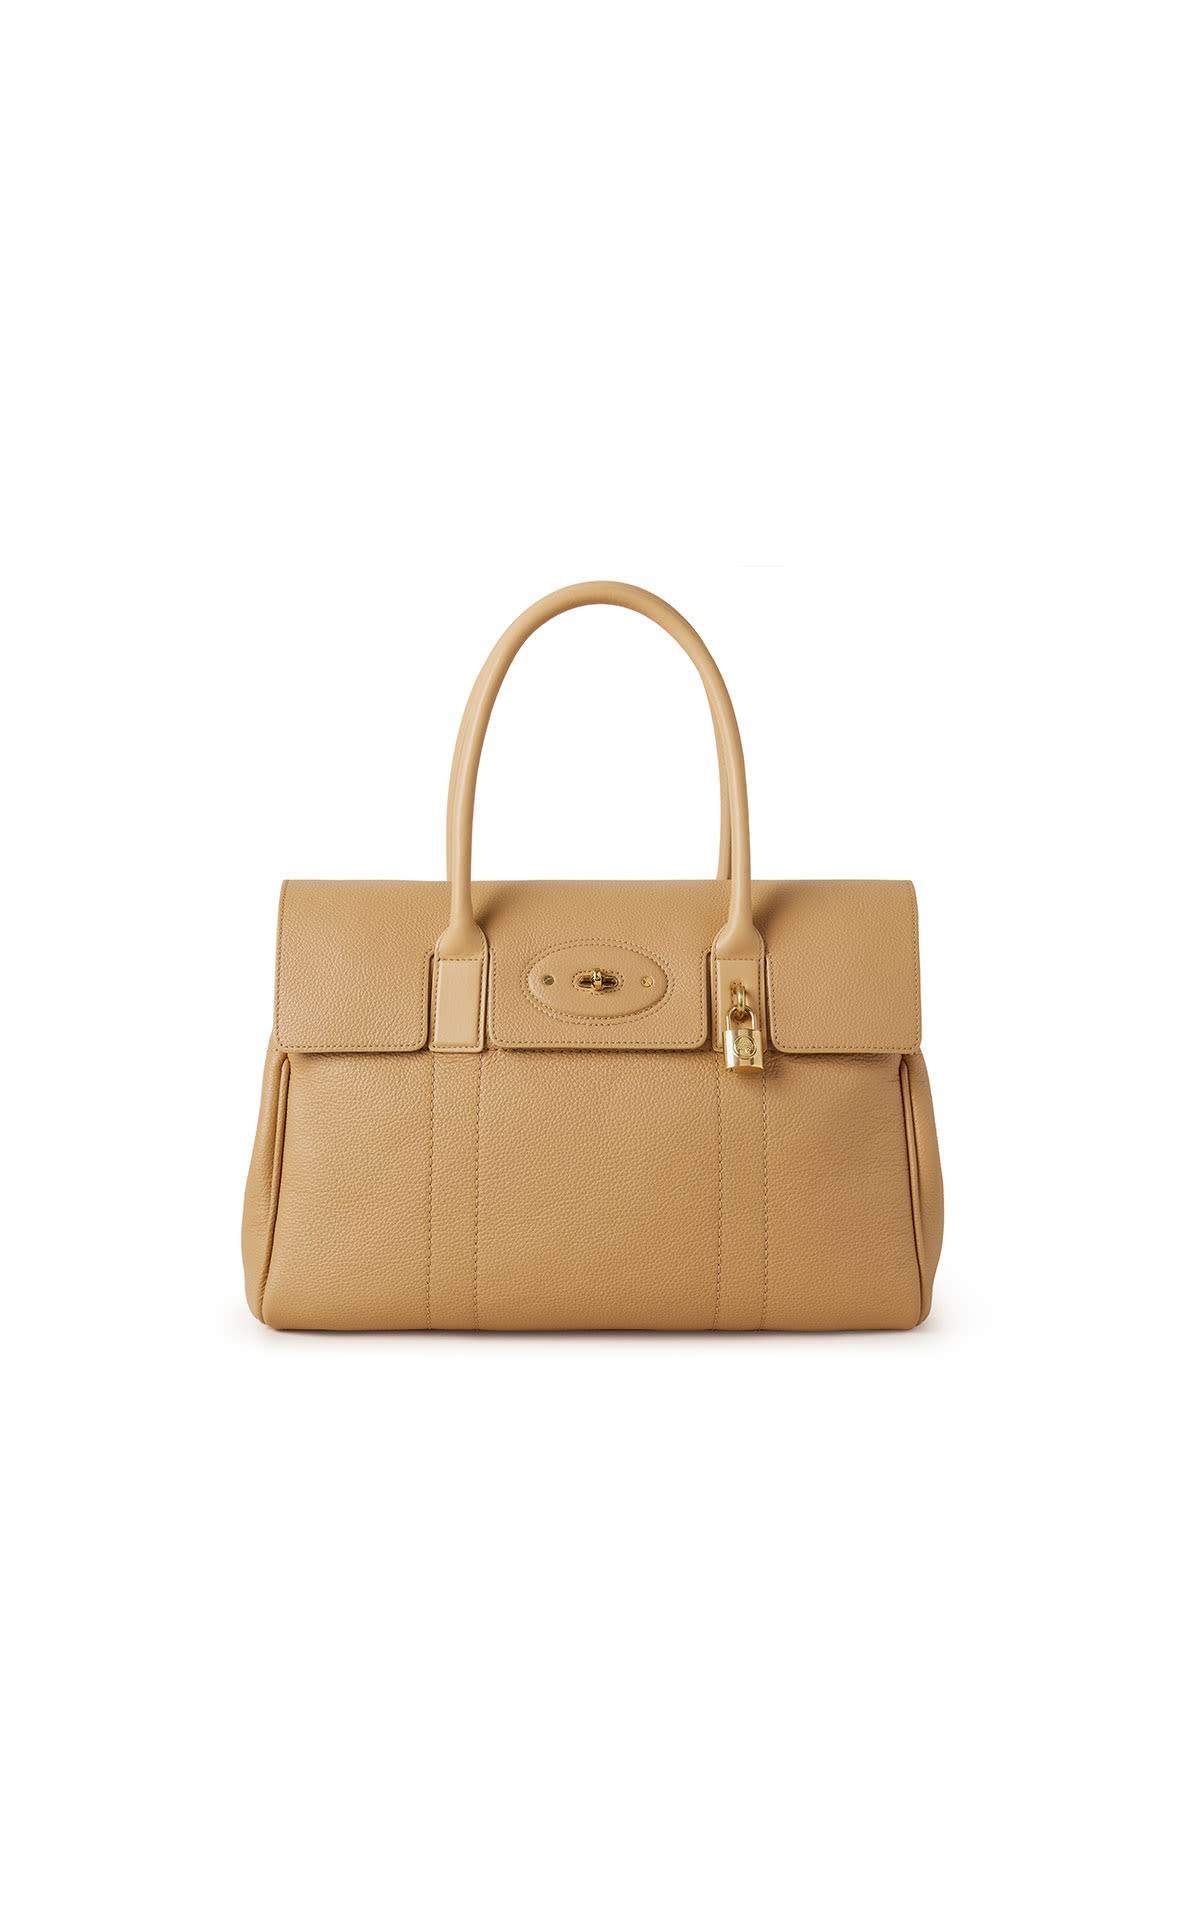 Mulberry Bayswater small classic grain from Bicester Village